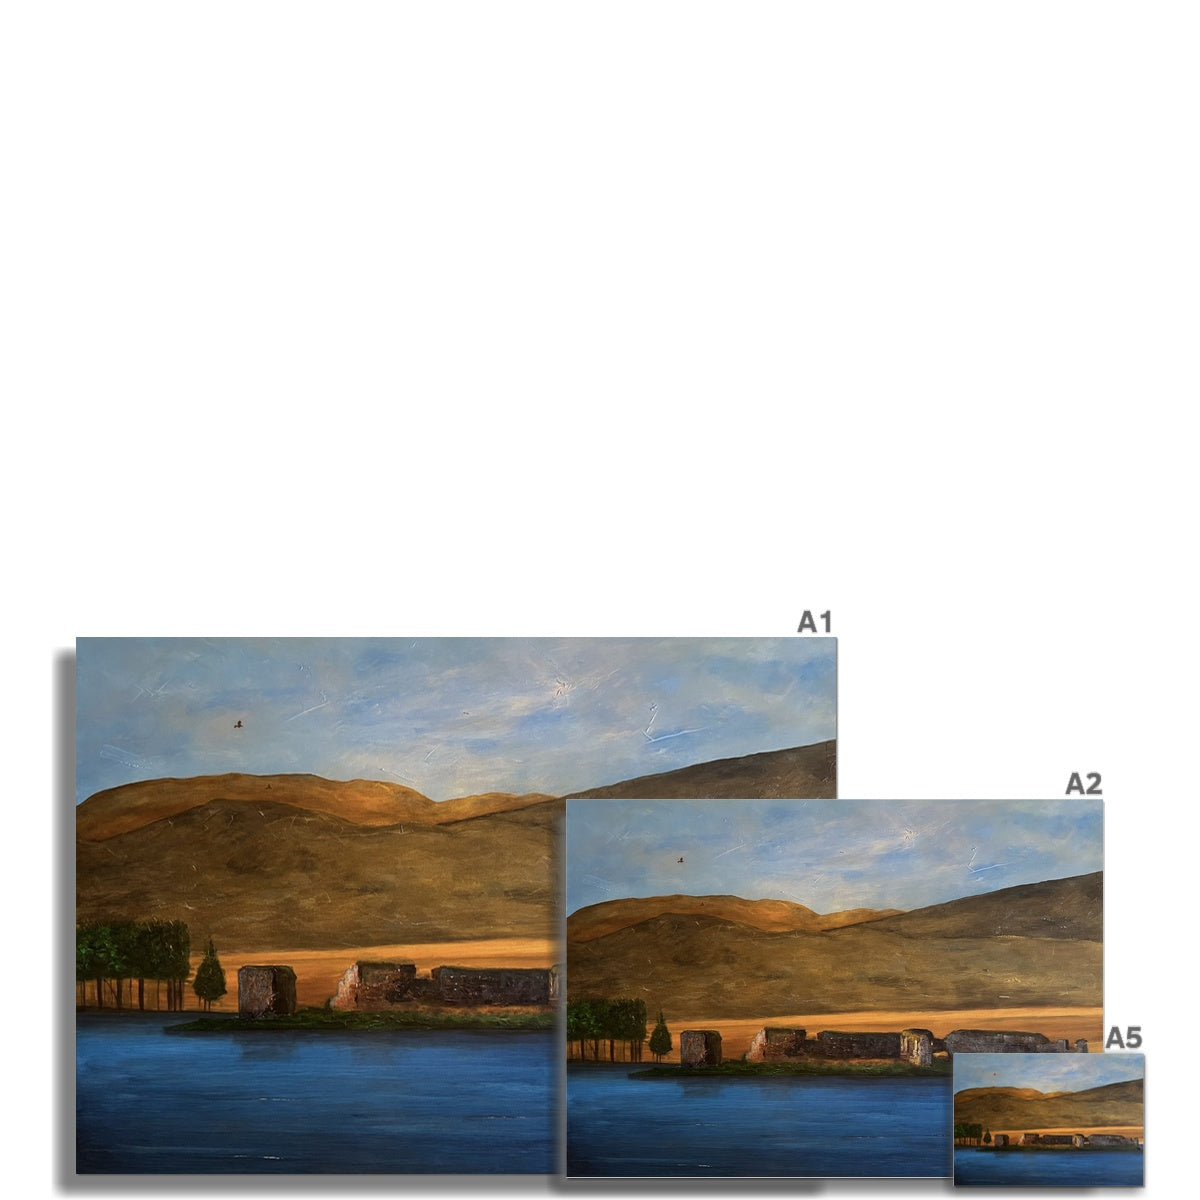 Lochindorb Castle Painting | Fine Art Prints From Scotland-Unframed Prints-Scottish Lochs & Mountains Art Gallery-Paintings, Prints, Homeware, Art Gifts From Scotland By Scottish Artist Kevin Hunter